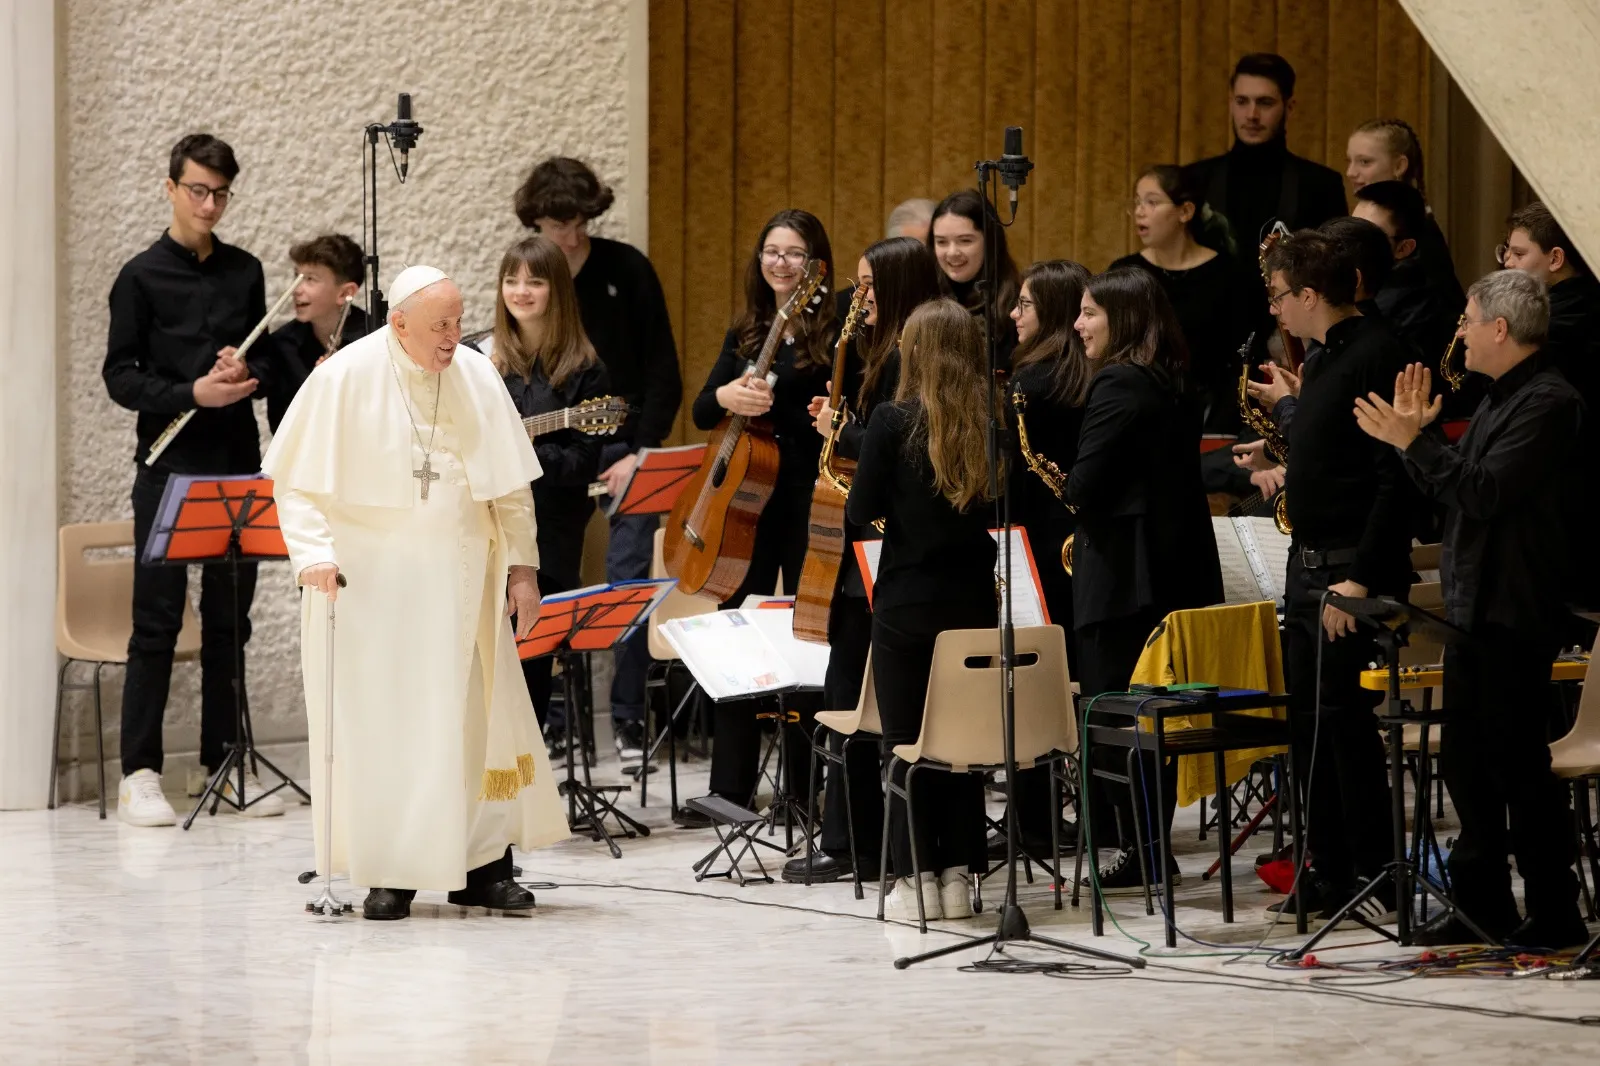 Pope Francis greets a youth orchestra who performed at the general audience on Feb. 15, 2023. Daniel Ibanez/CNA